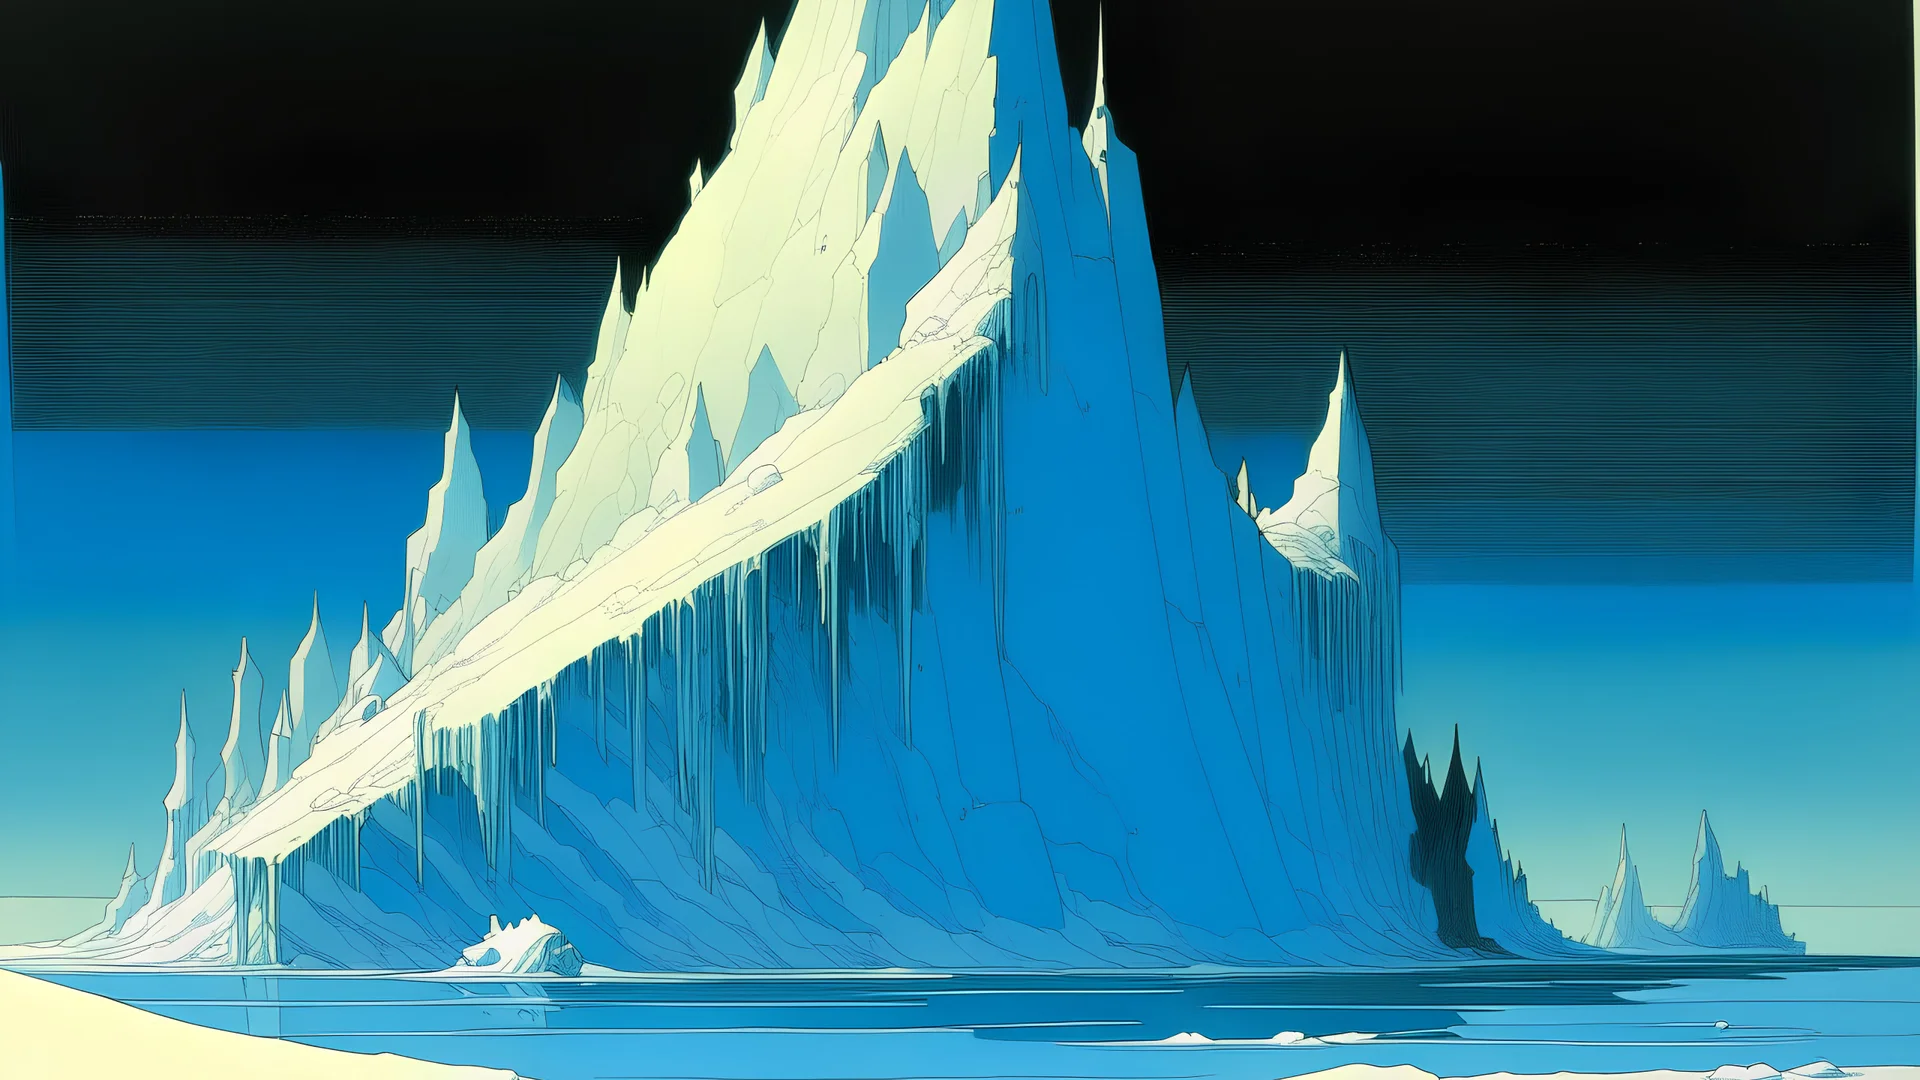 A digital serigraphy by Moebius and Myazaki of an iceberg.